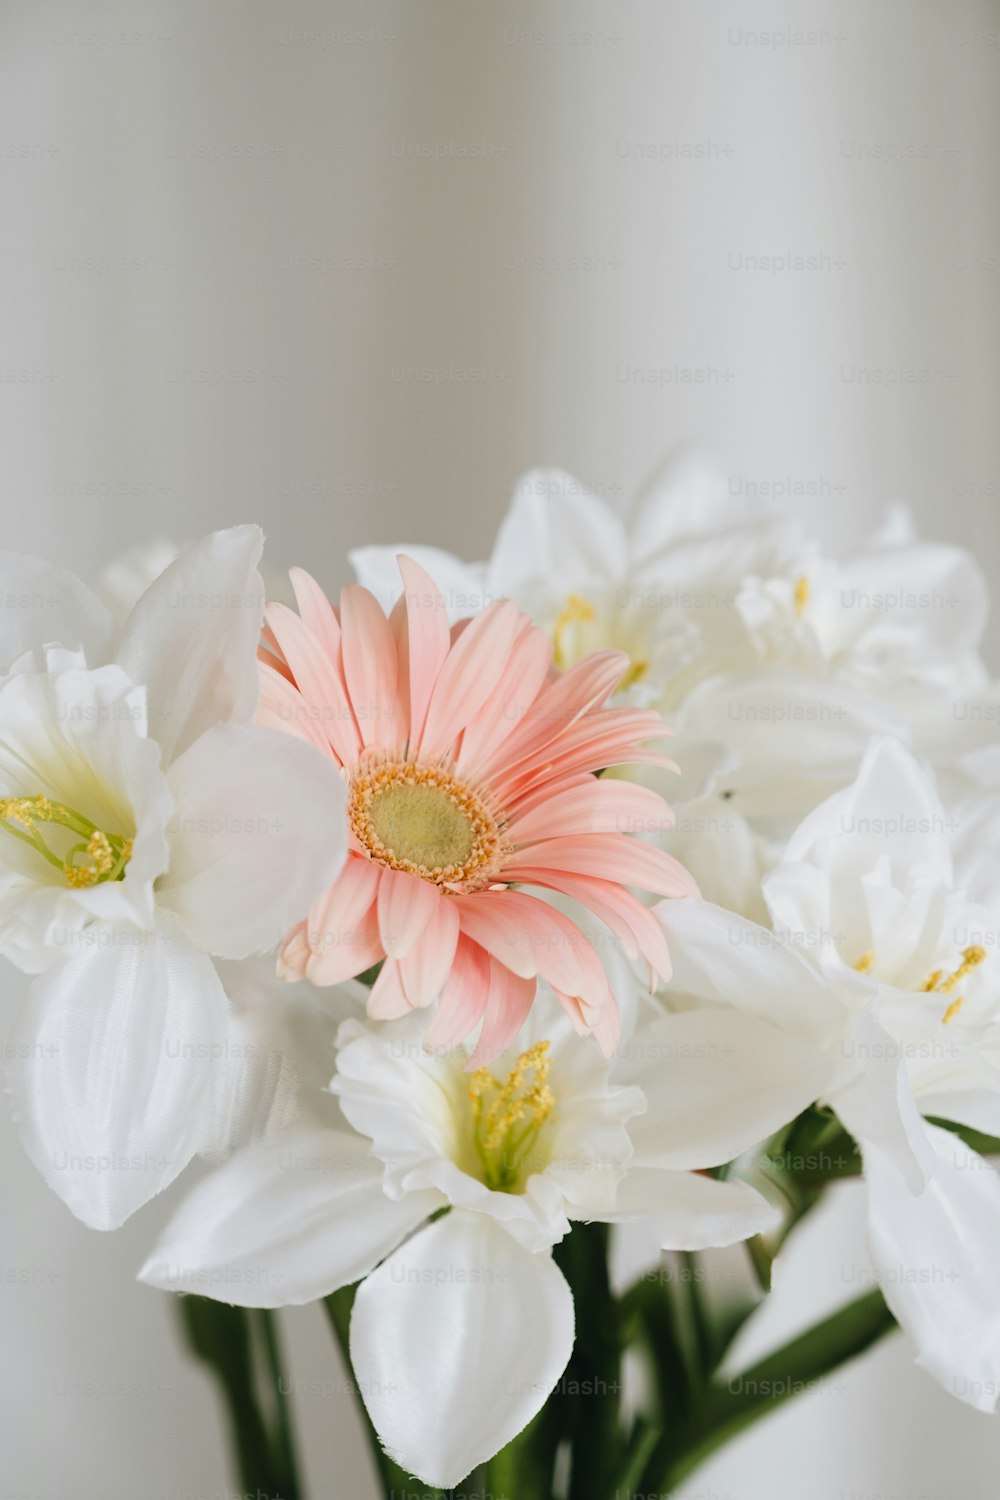 a vase filled with white and pink flowers